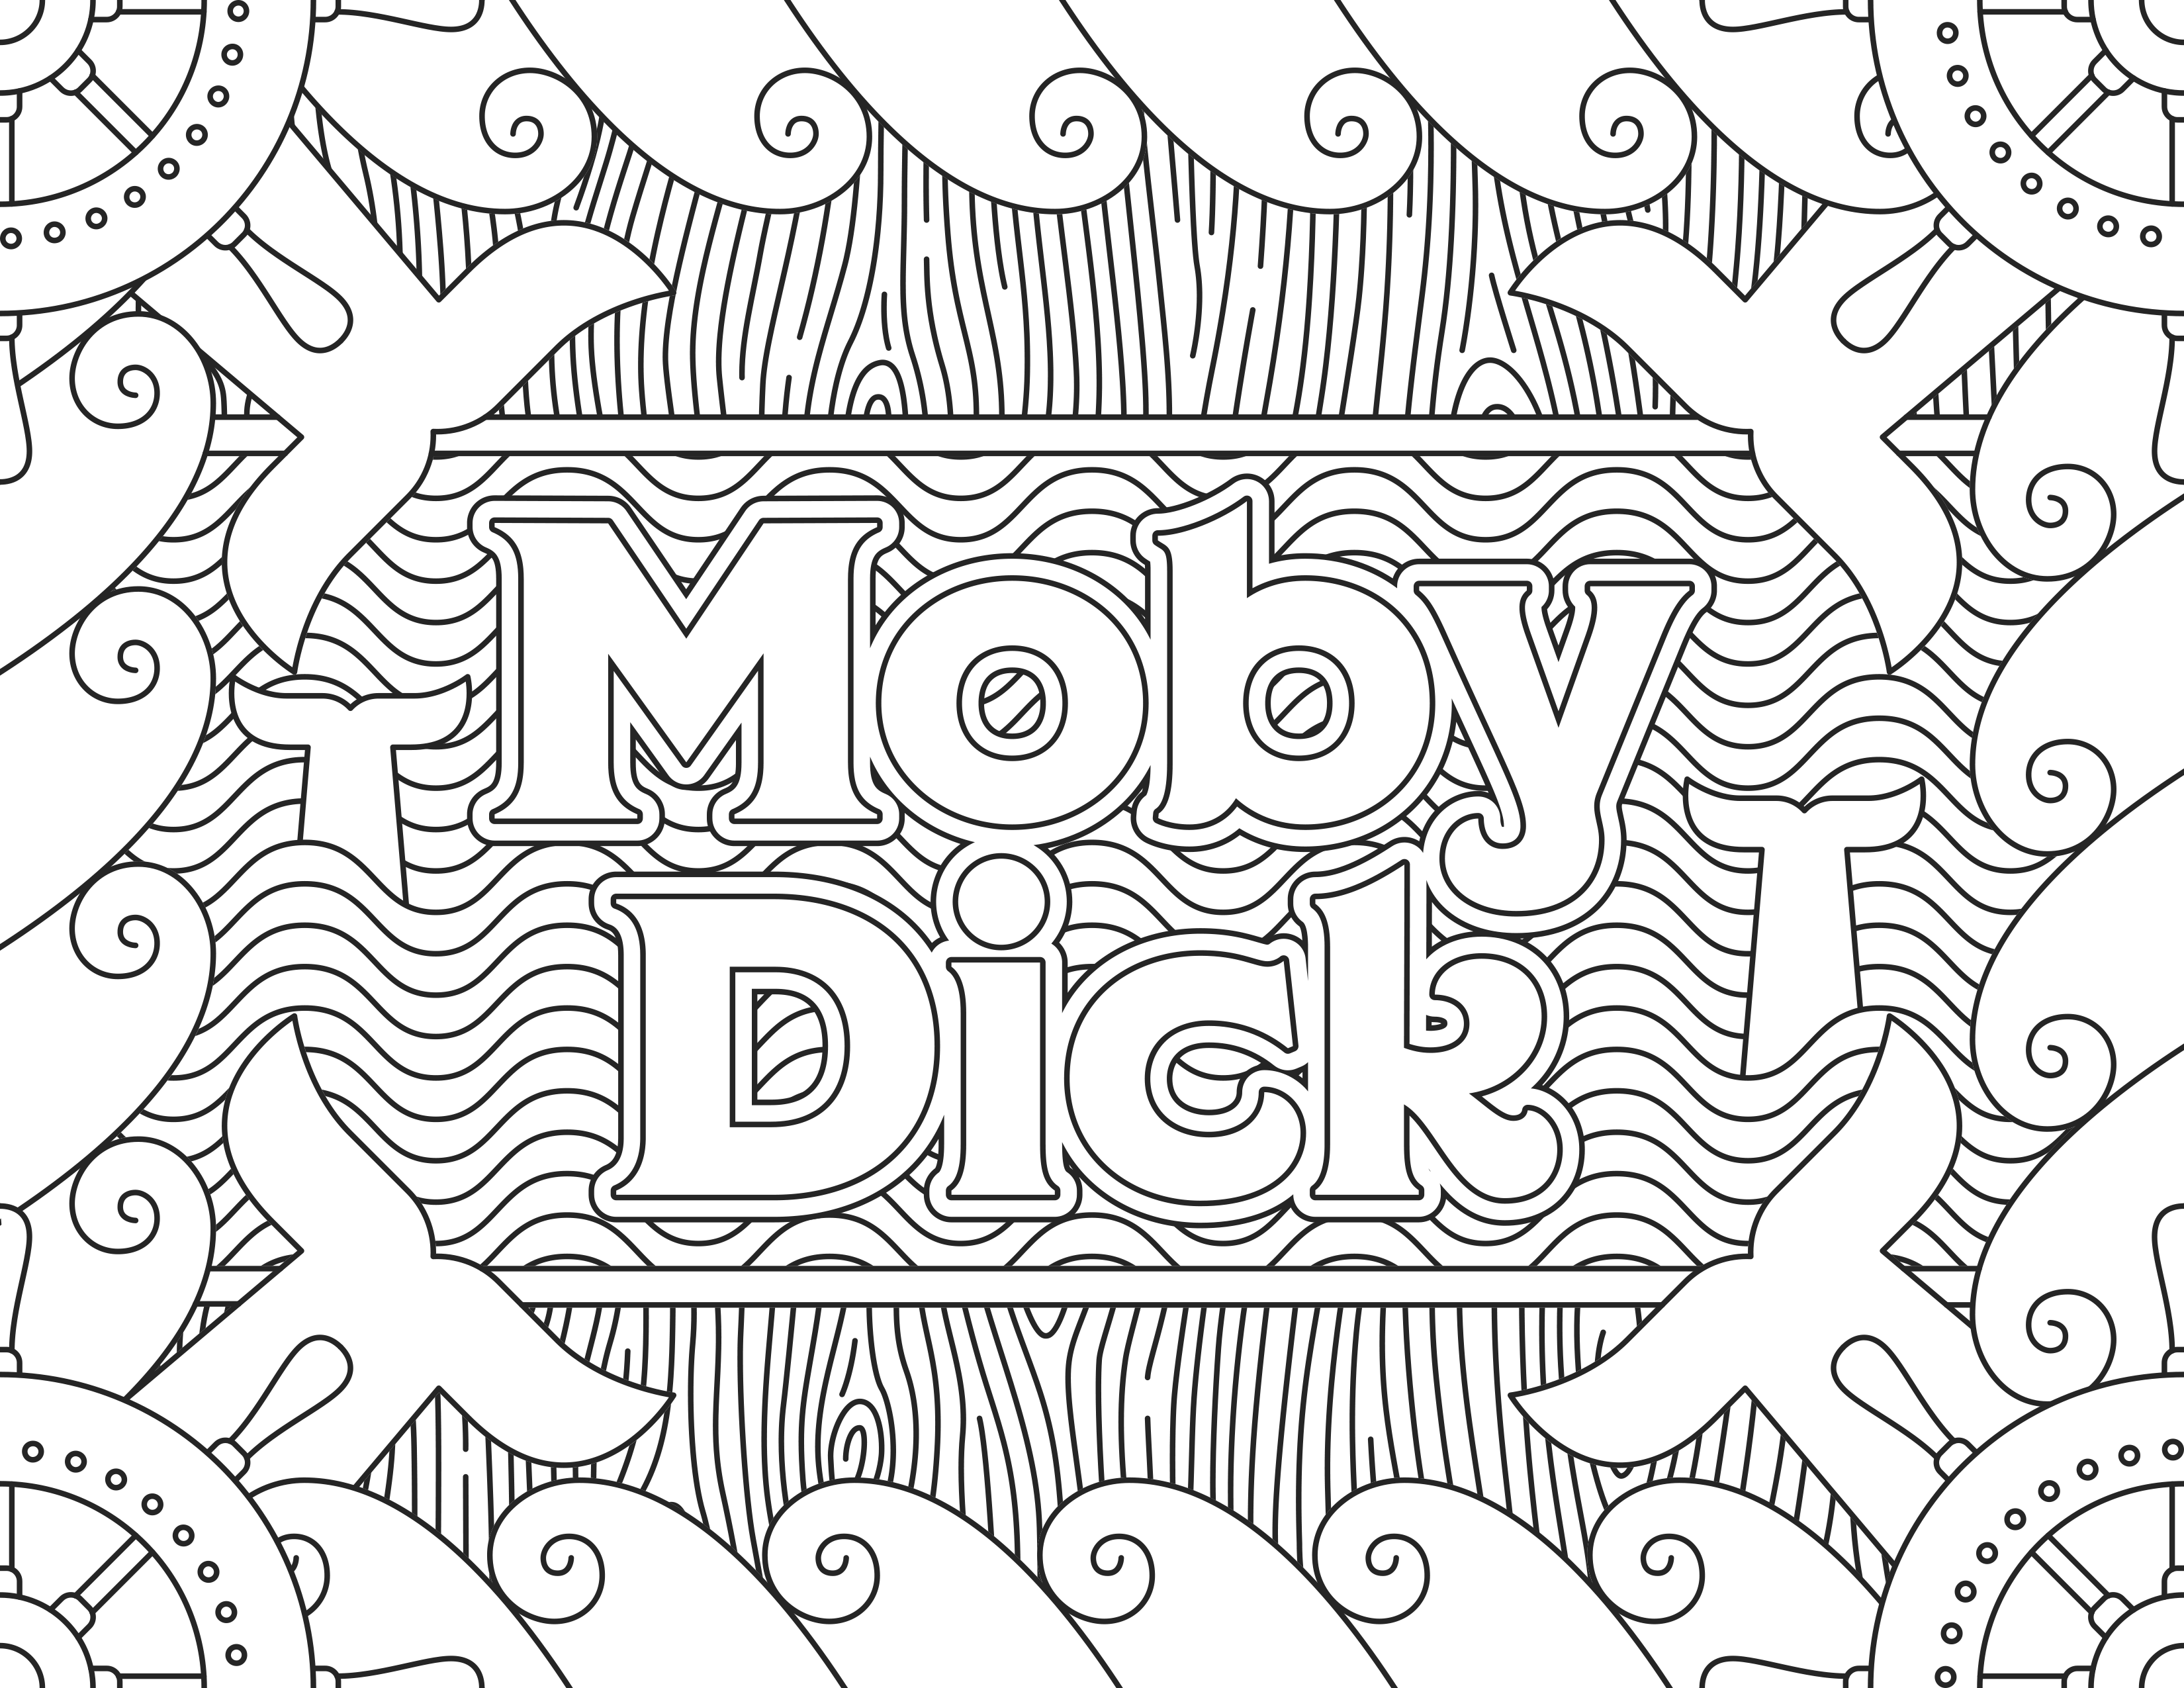 Coloring page inspired by the Movie 'Moby Dick', for the website Readers.com.